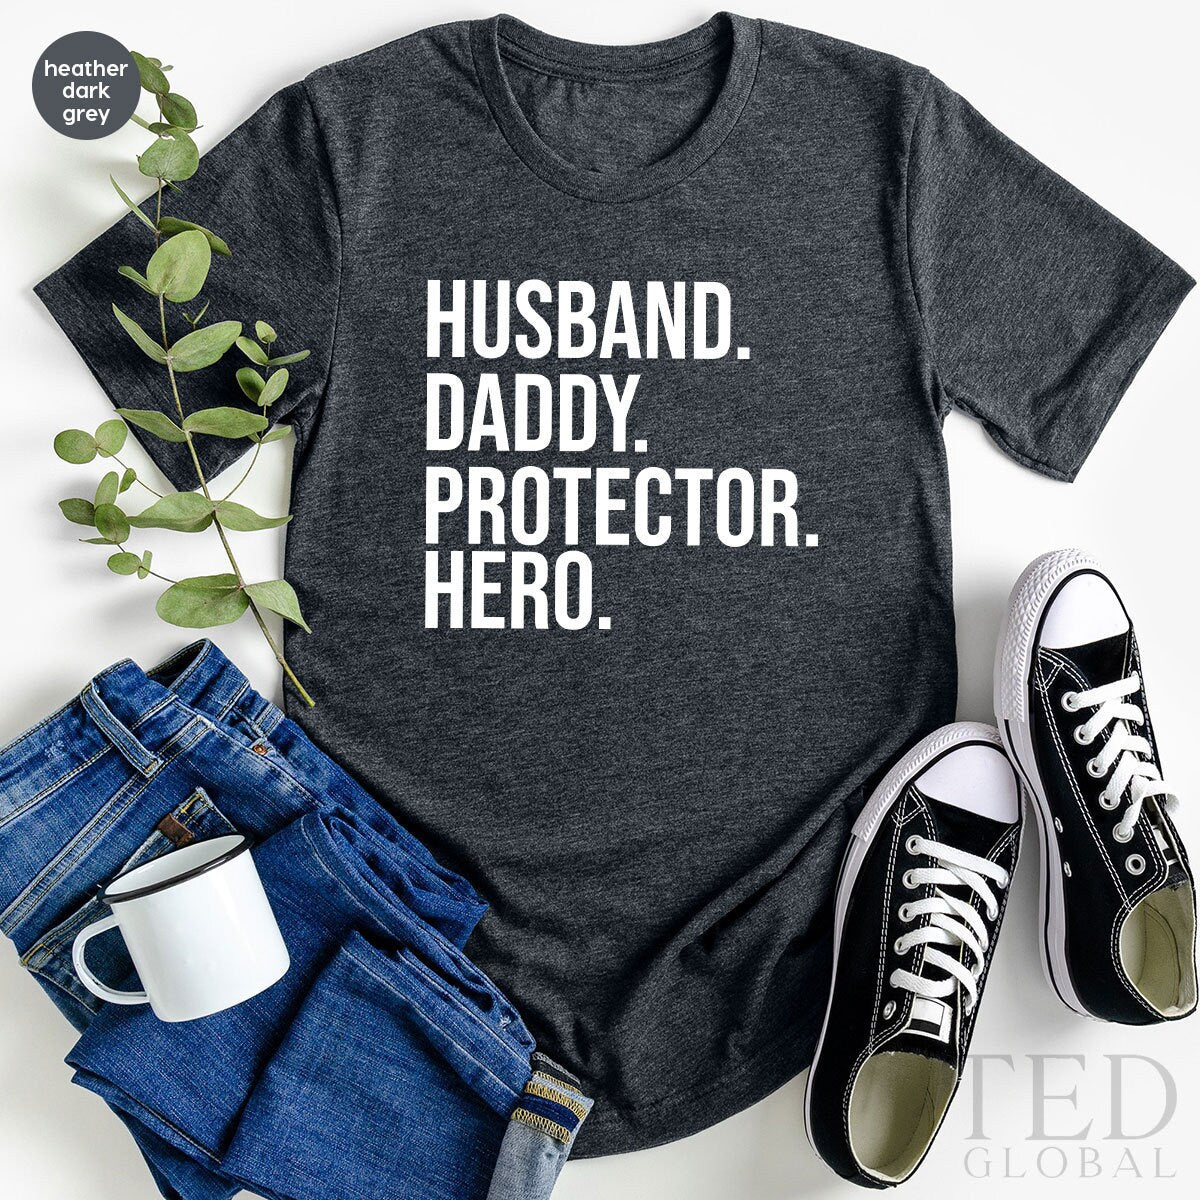 Dad Shirt, Best Dad Shirt, Protector Hero Daddy T Shirt, Dad Birthday Gift, Gift For Husband, Dad To Be Shirt , Fathers Day Gift From Wife - Fastdeliverytees.com